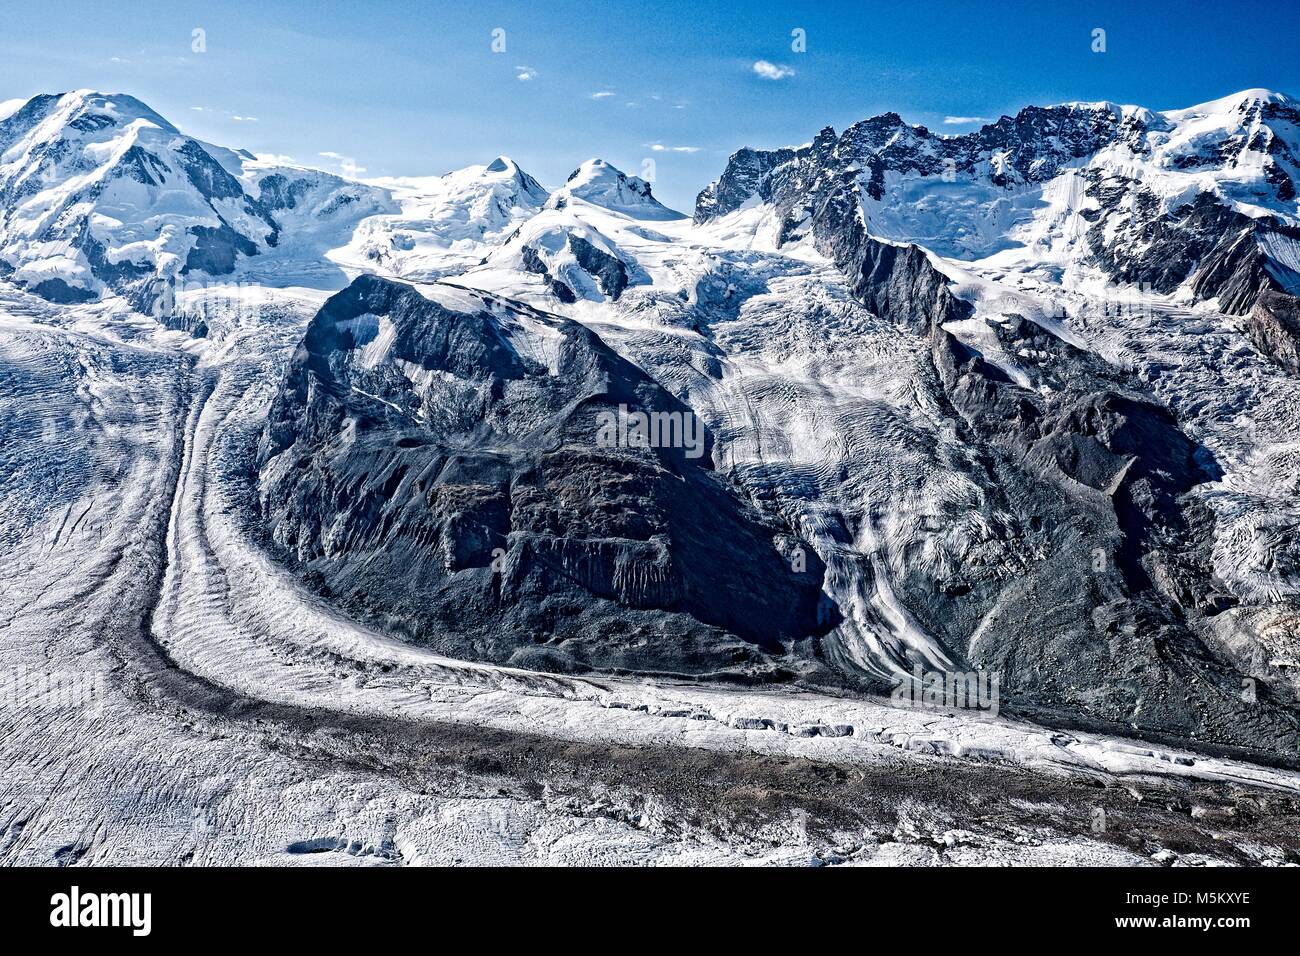 As ice descends into the Gornergletscher Valley it brings with it rocks that have been eroded and are now carried as moraine. Stock Photo